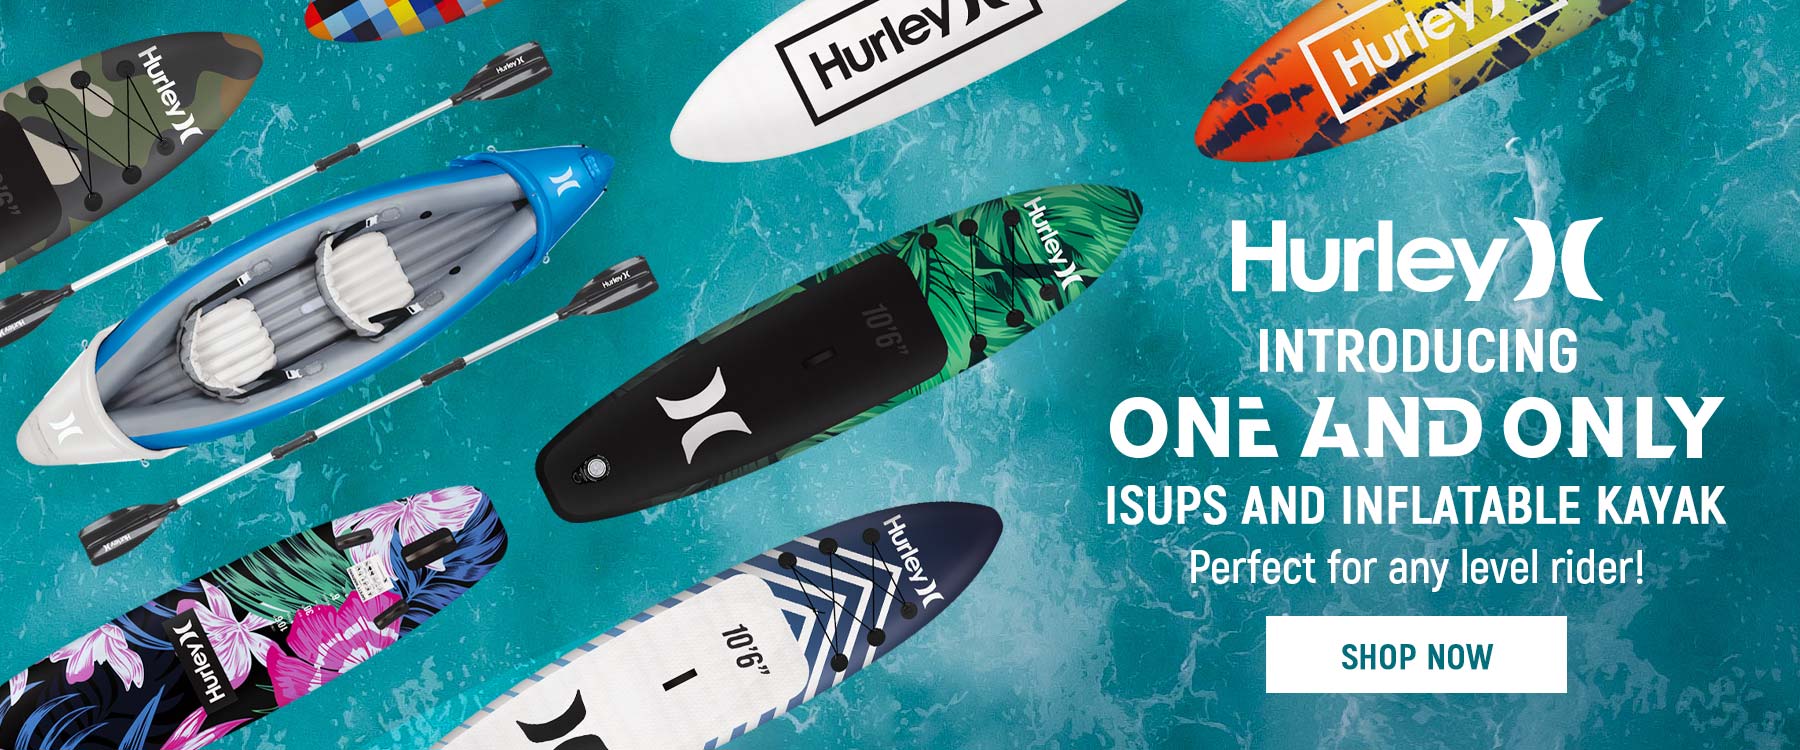 Shop Hurley Inflatable Stand Up Paddleboards at HeySurf